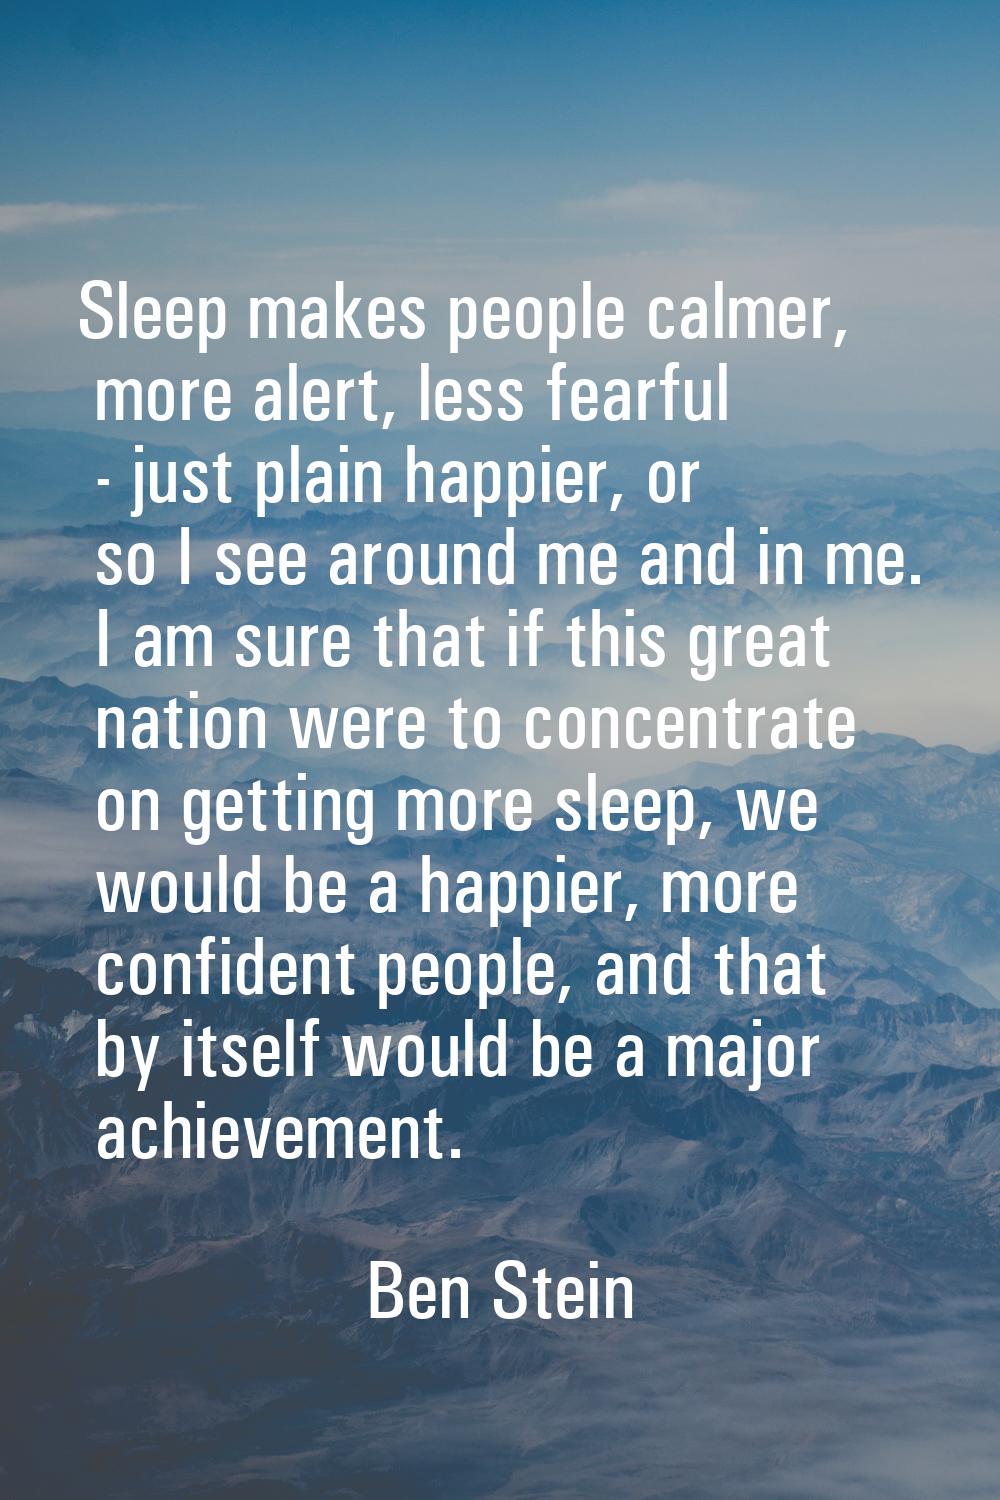 Sleep makes people calmer, more alert, less fearful - just plain happier, or so I see around me and